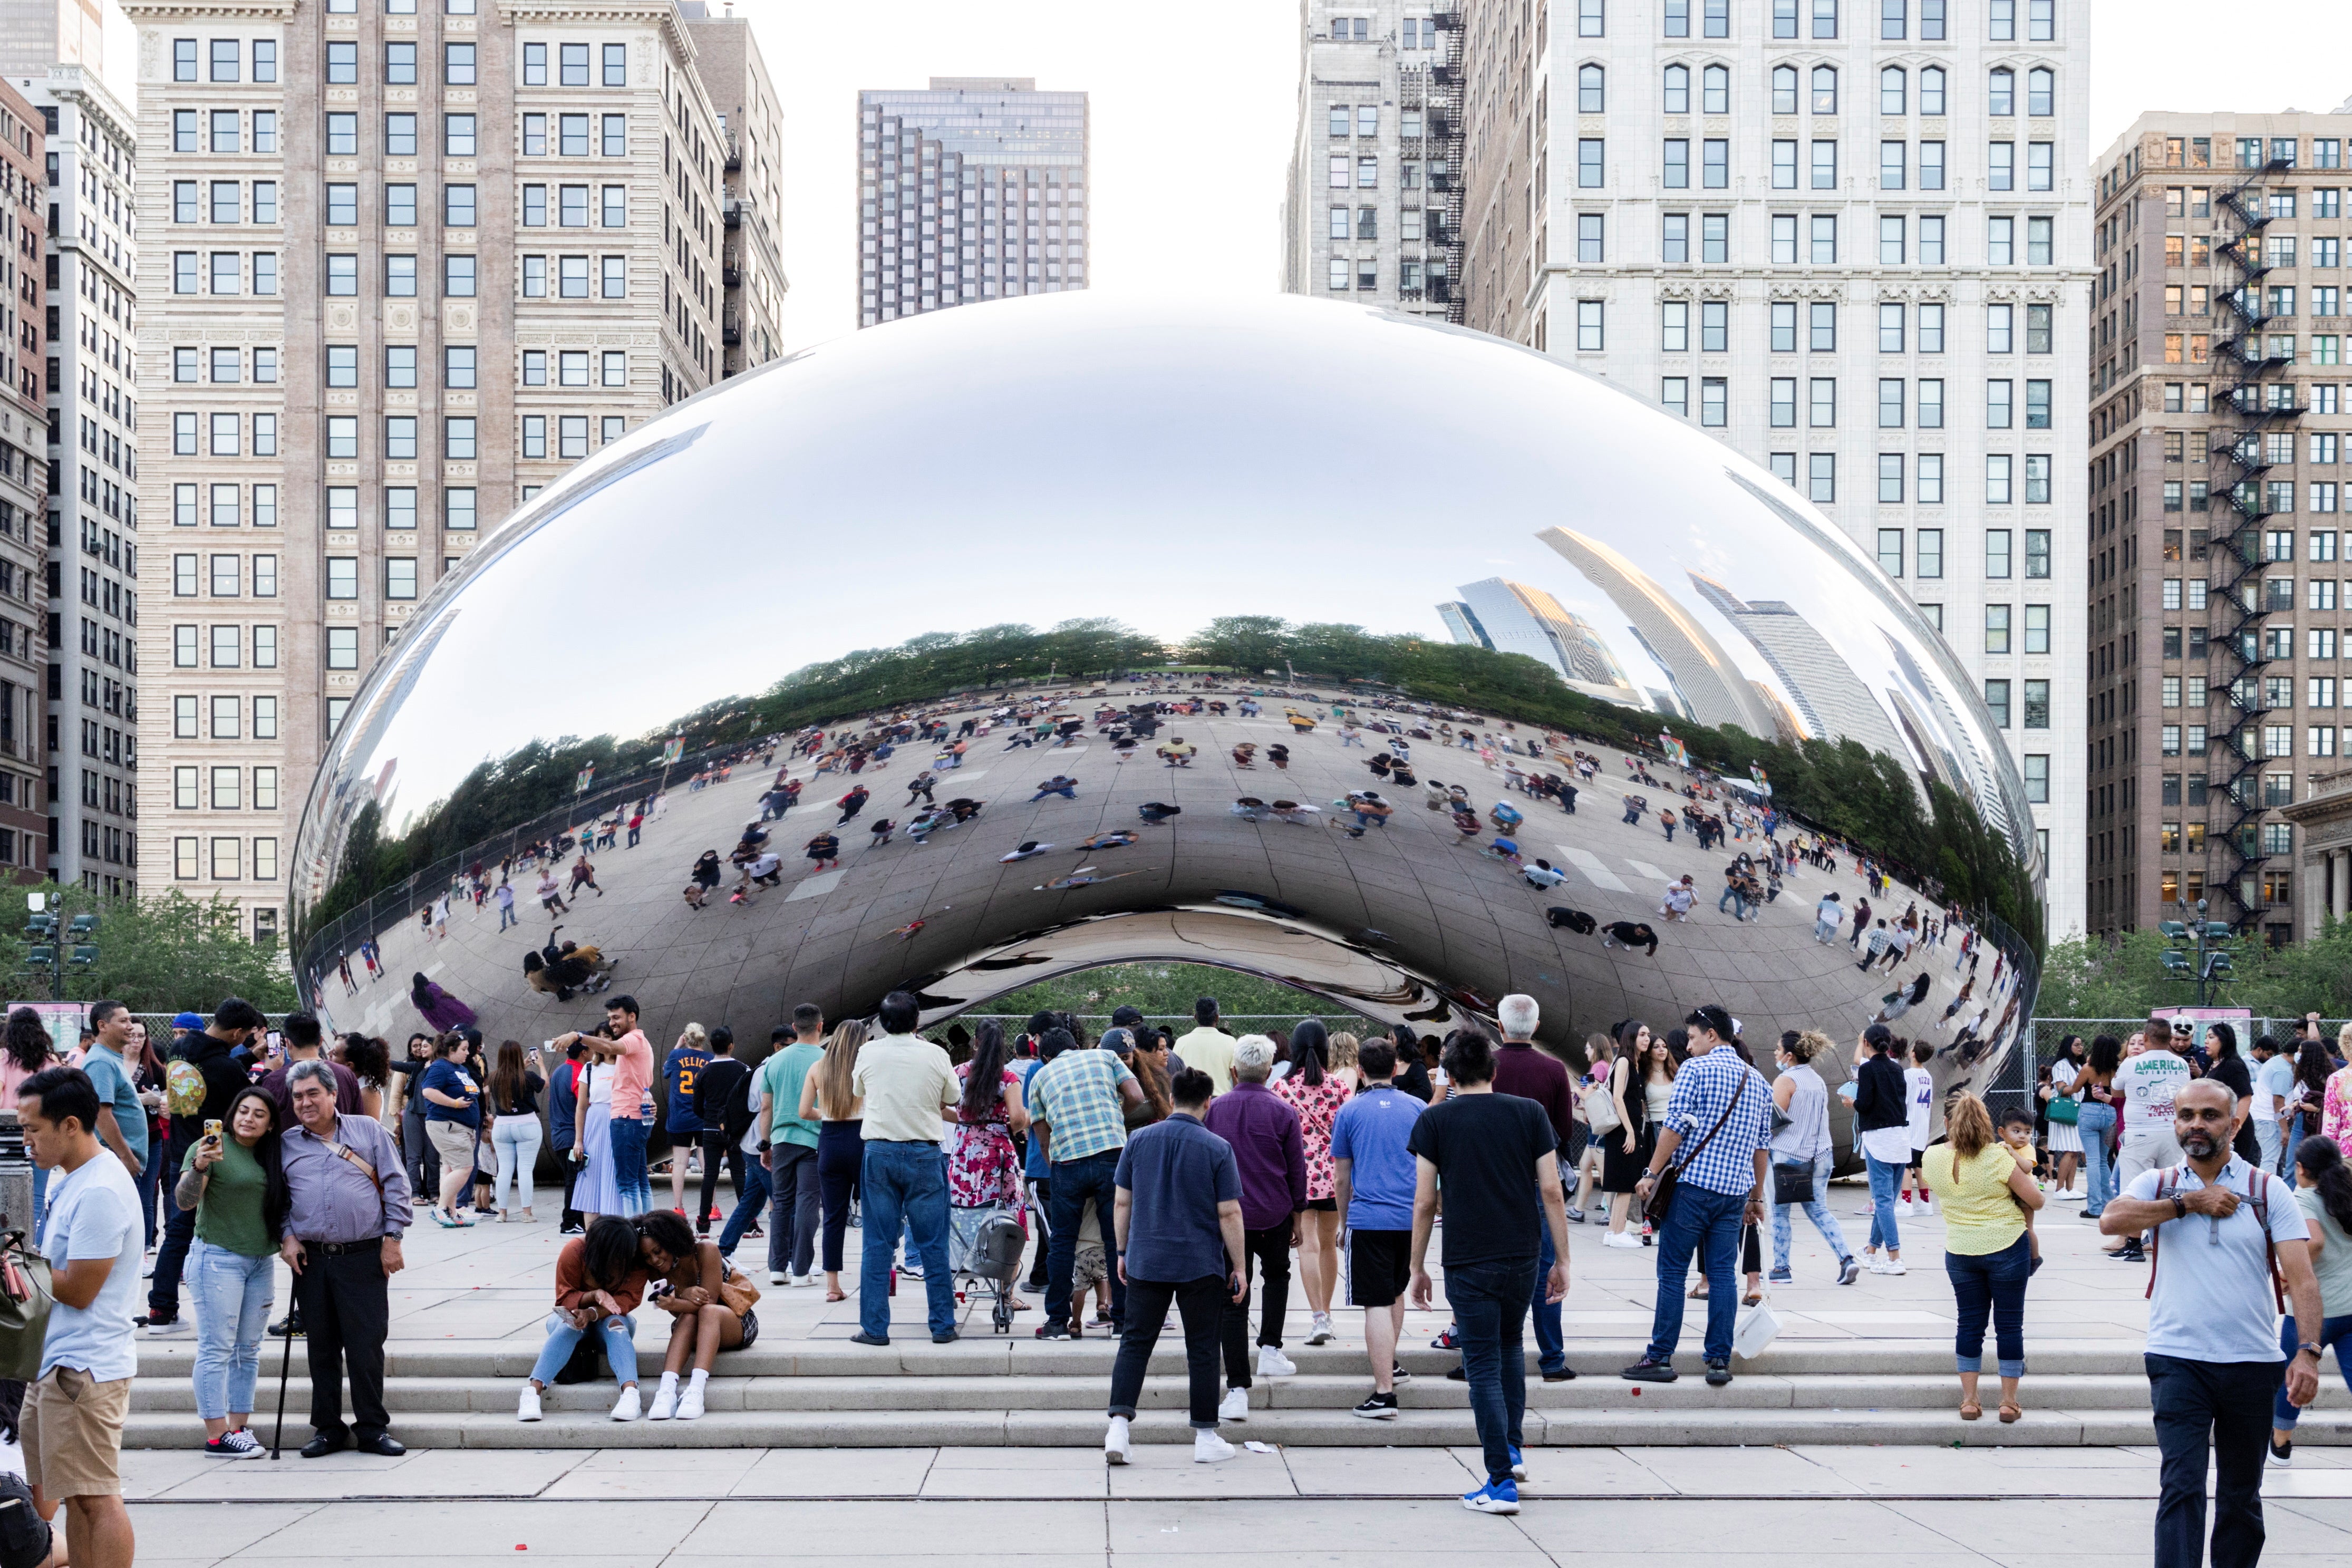 Kapoor’s ‘Cloud Gate’ sculpture, which he describes as having ‘indeterminate scale’